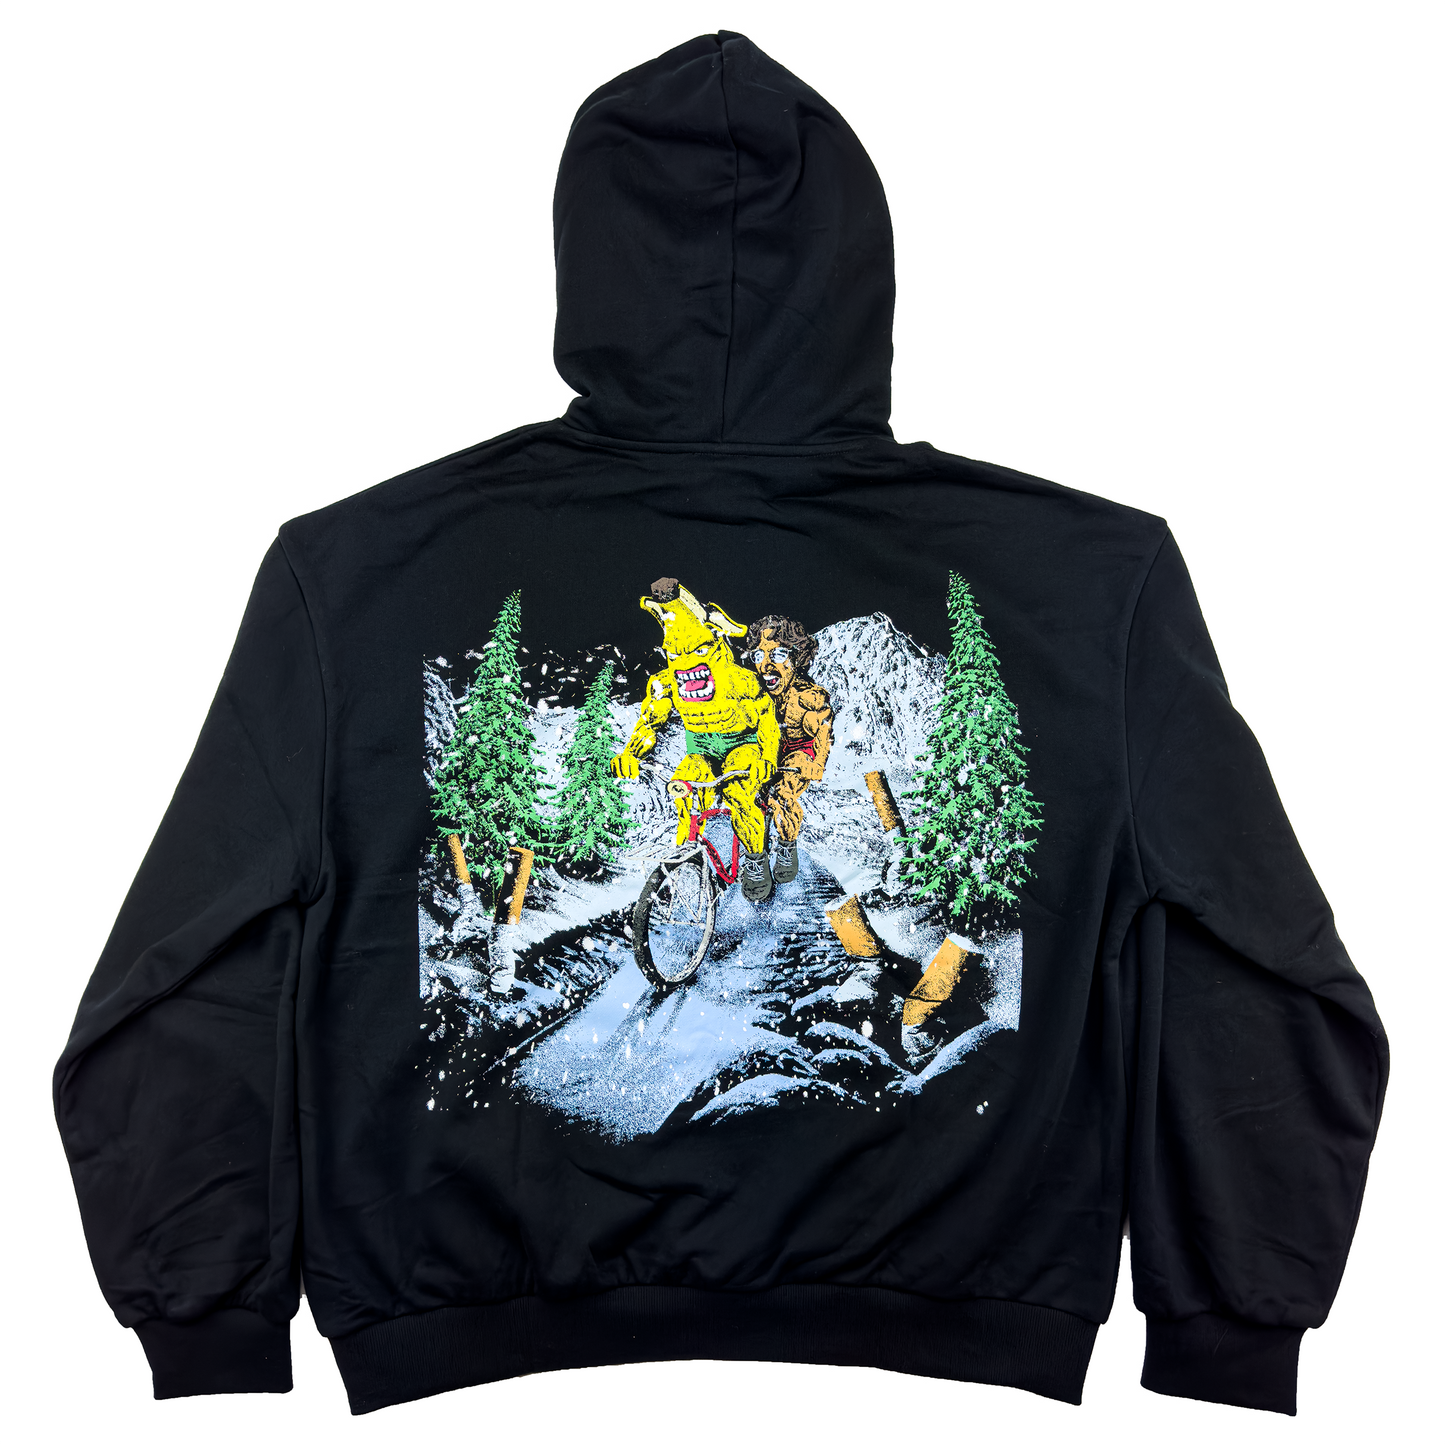 Cold Ass Riding Hoodie